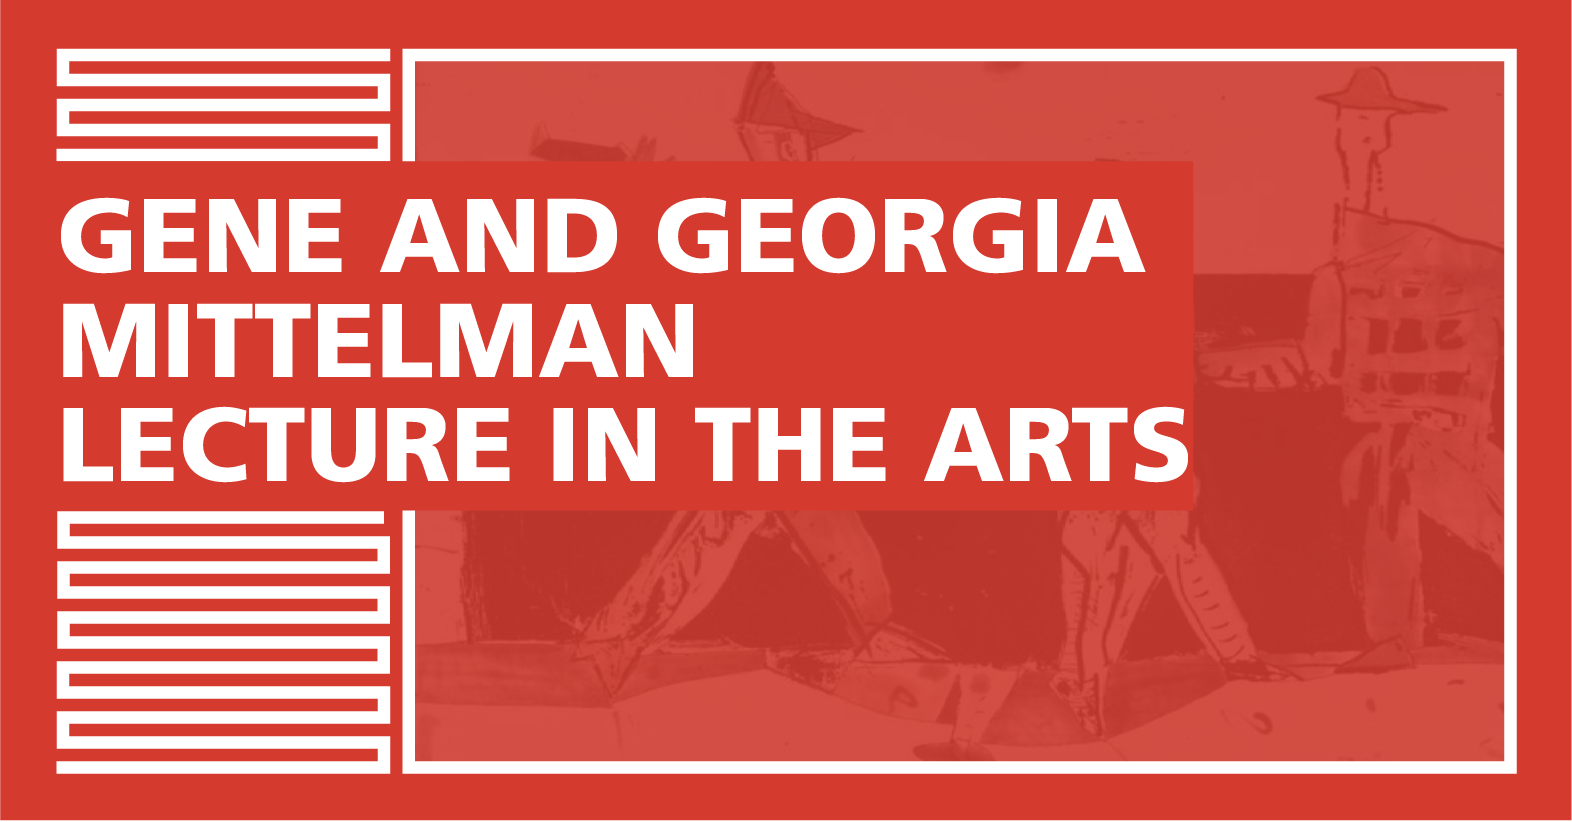 Cover Image for "Gene and Georgia Mittelman Lecture in the Arts"